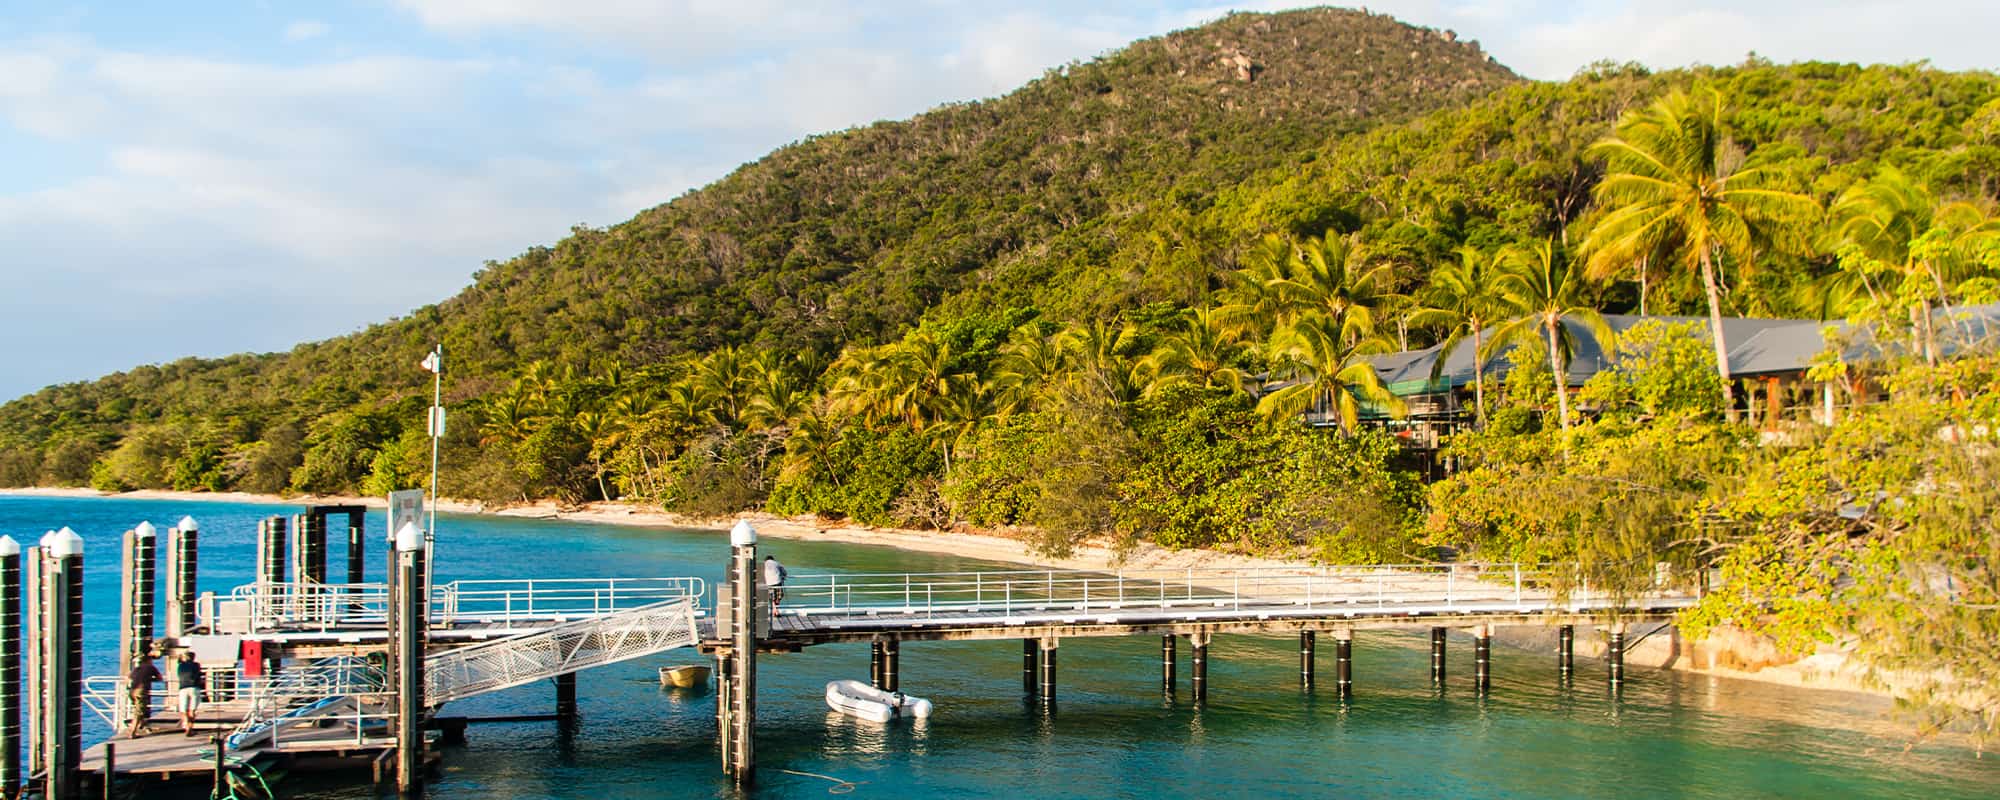 12 Day Trips From Cairns